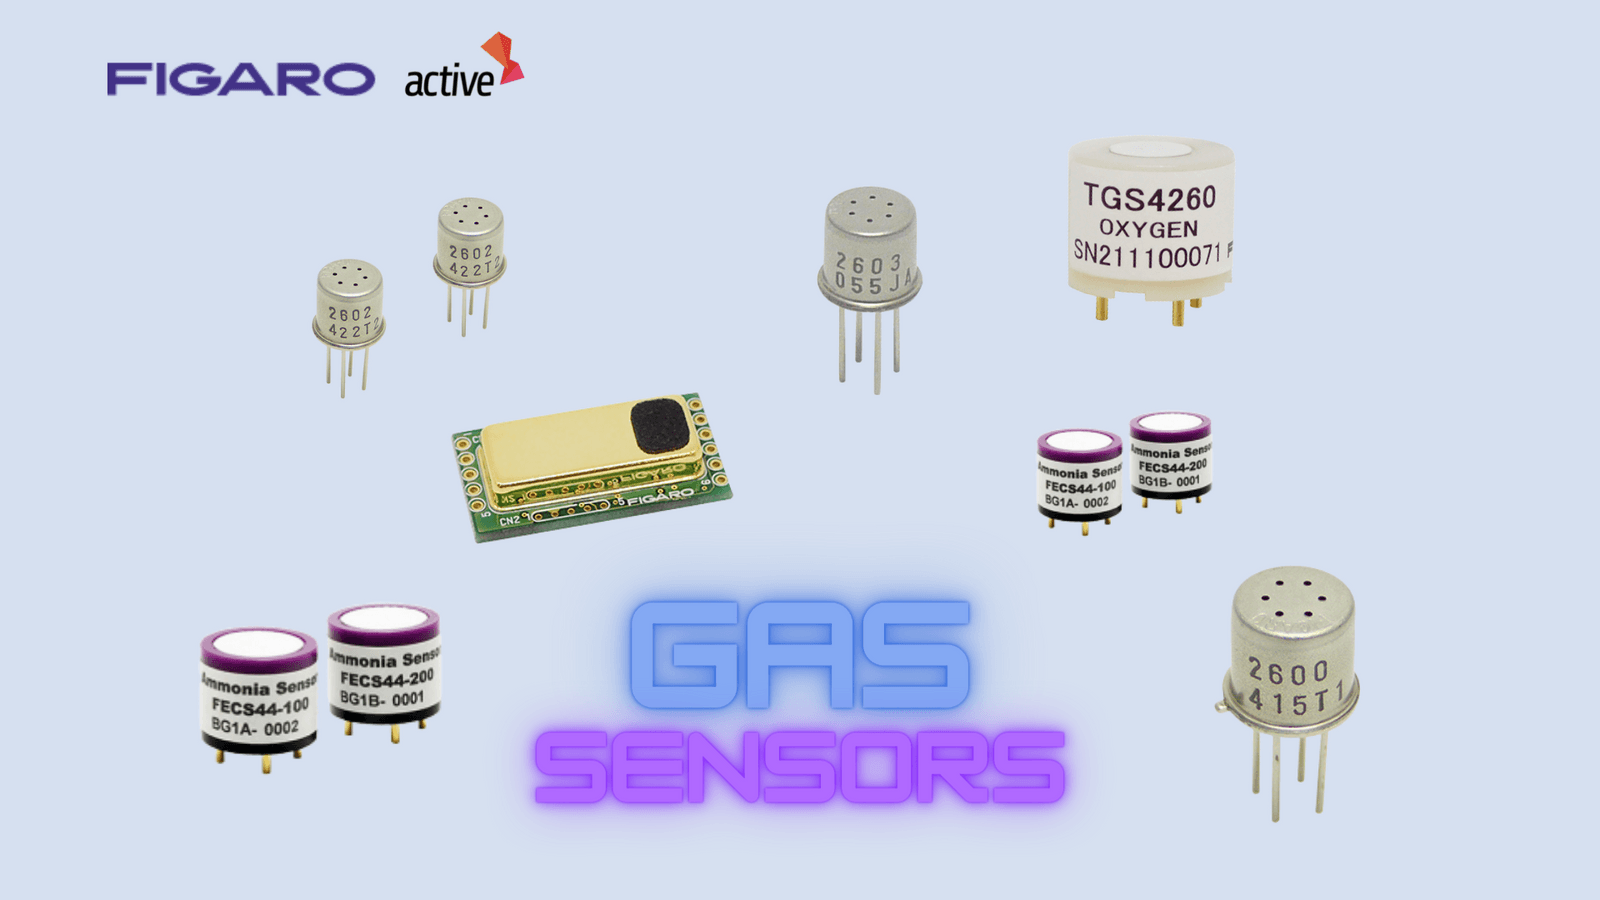 This is Figaro Gas Sensors